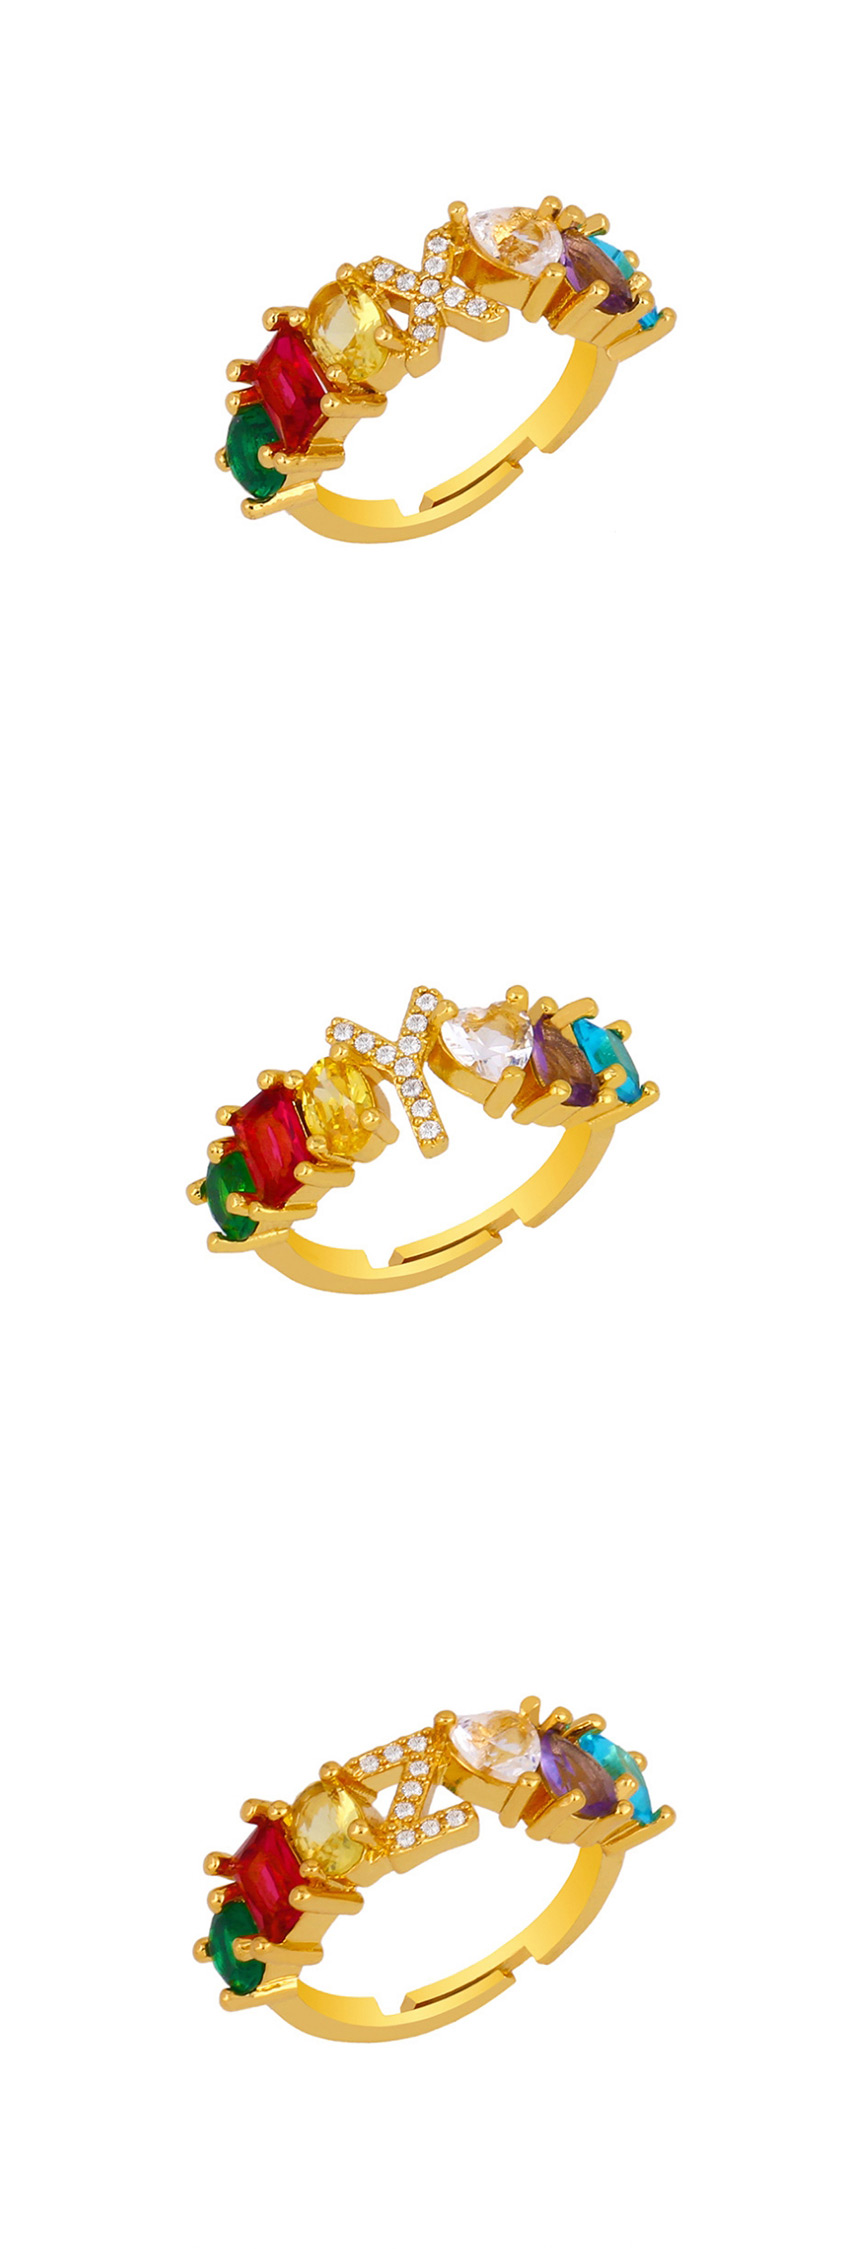 Fashion S Gold Heart-shaped Adjustable Ring With Colorful Diamond Letters,Rings